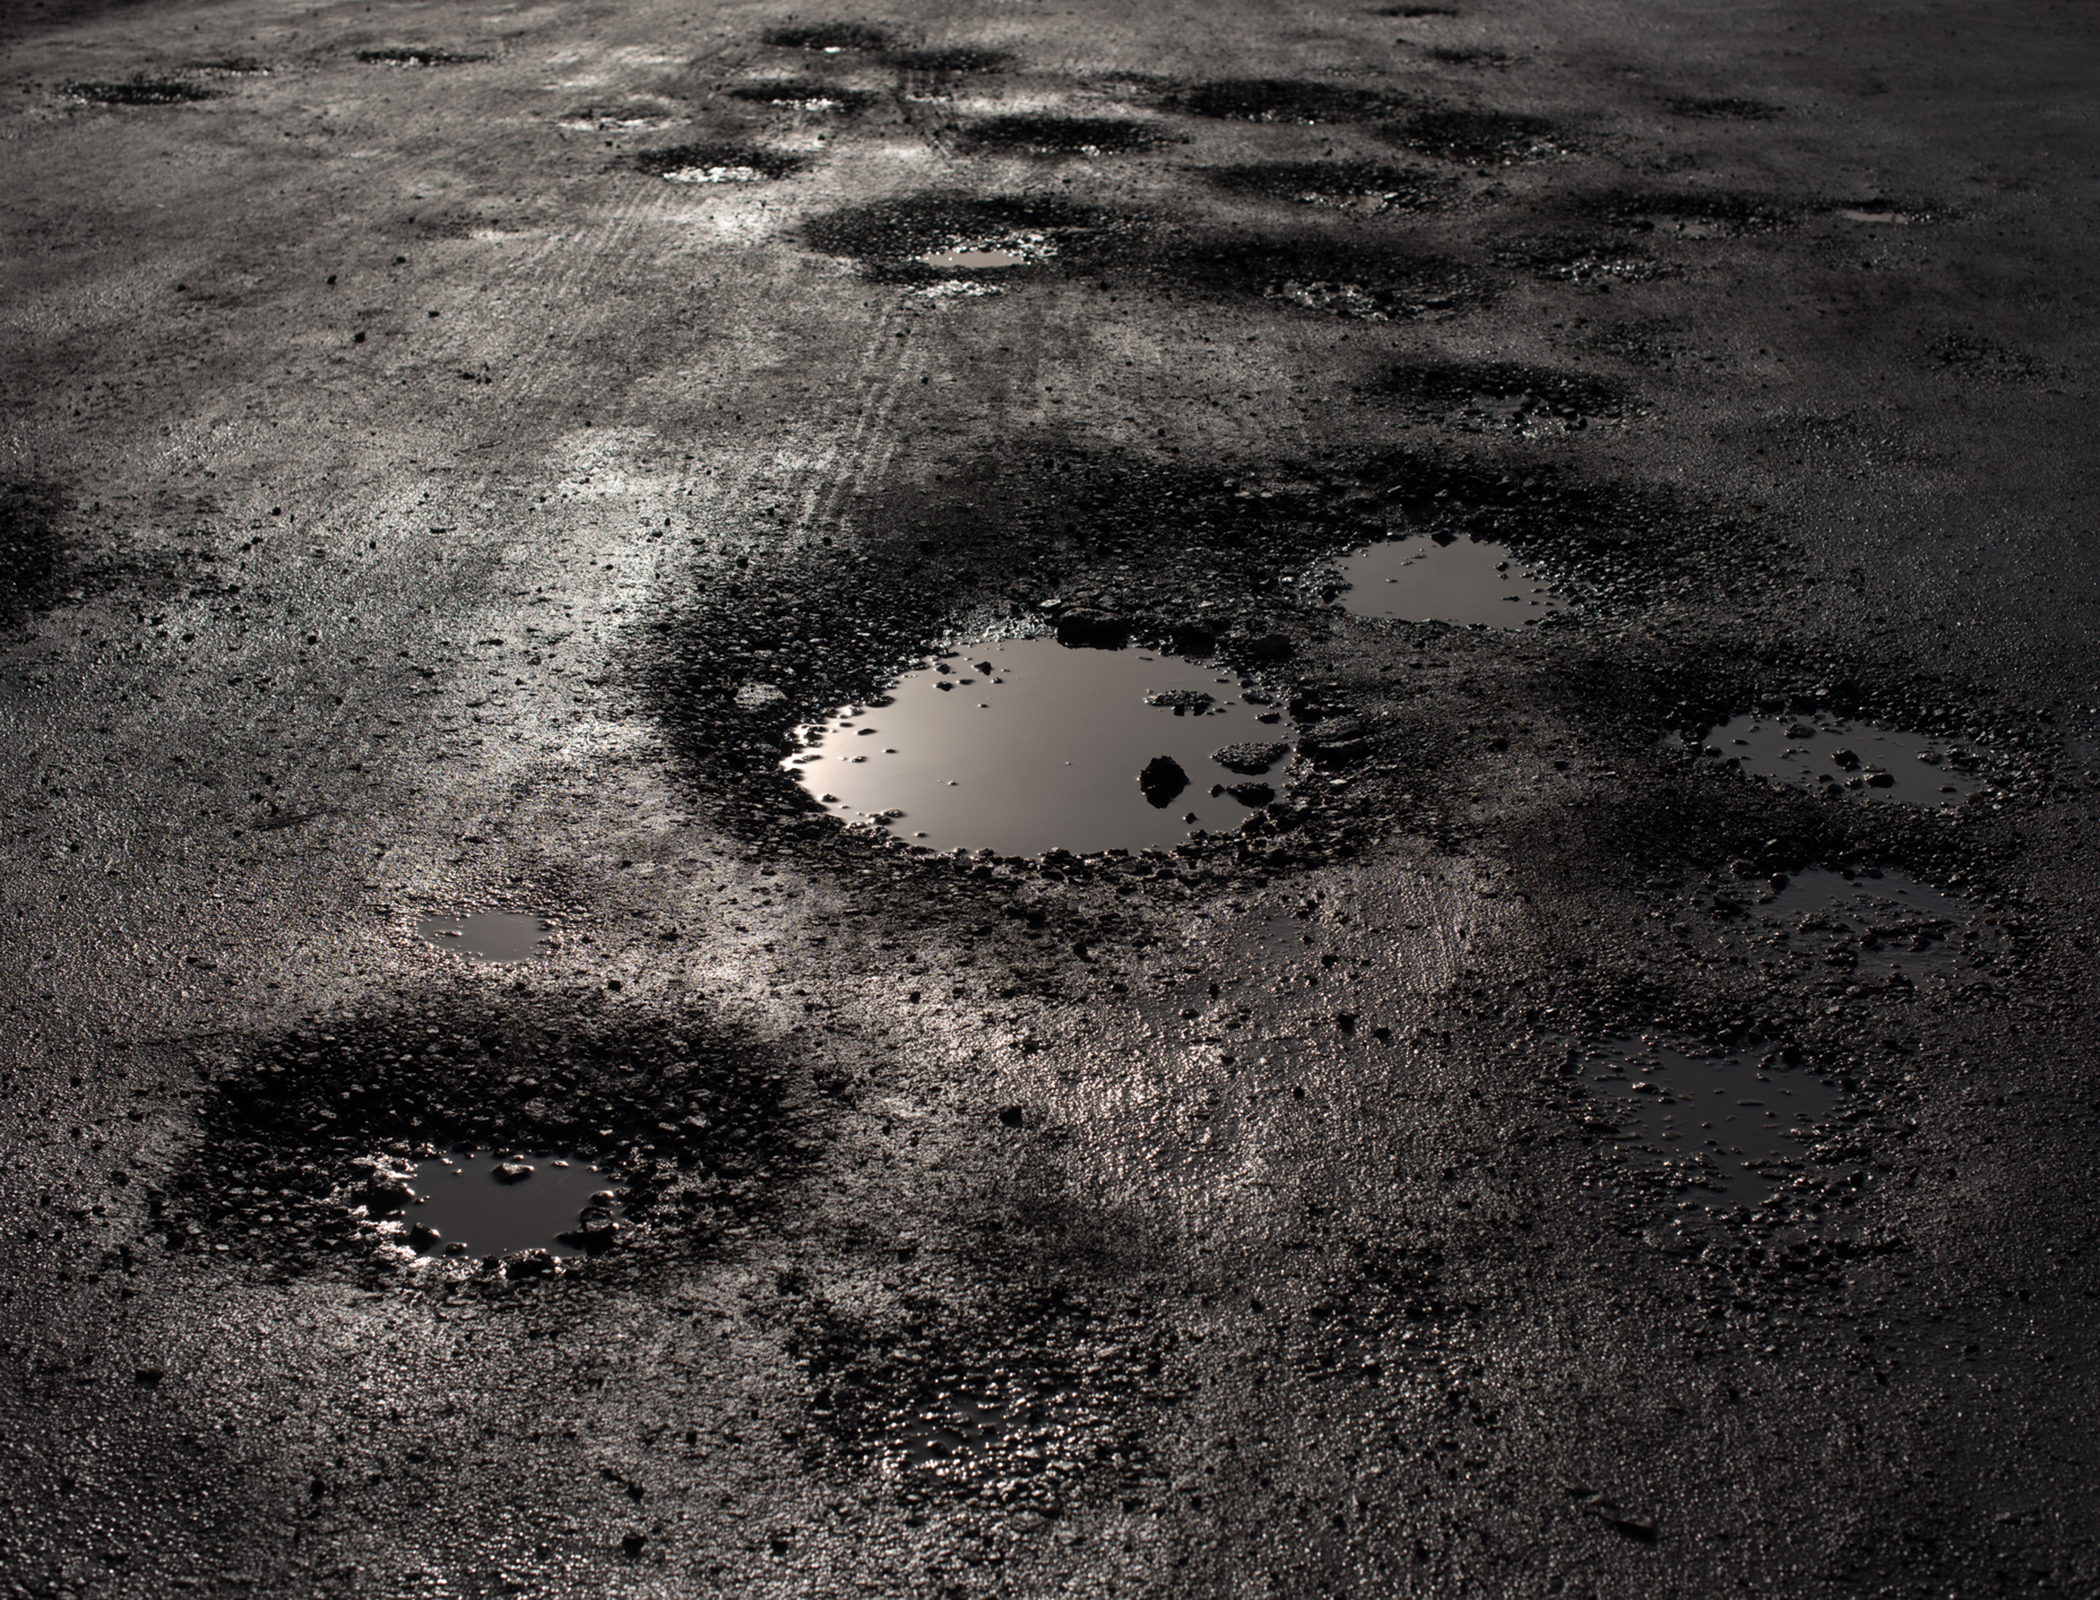 Potholes could be prevented with ground source heat pumps, researchers say